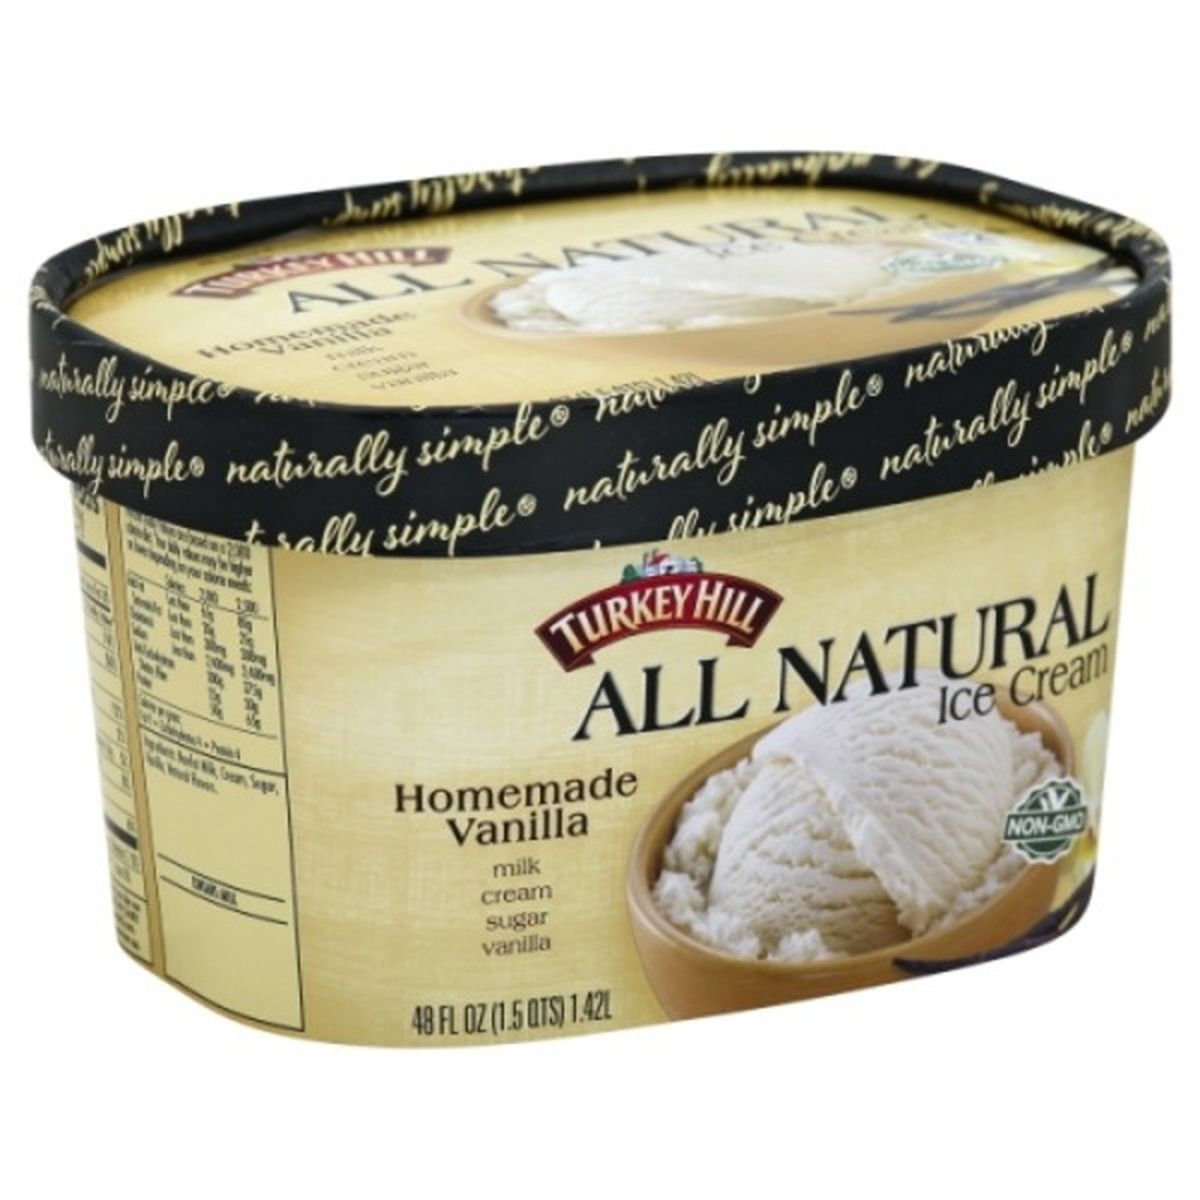 Calories in Turkey Hill Naturally Simple Ice Cream, All Natural, Homemade Vanilla